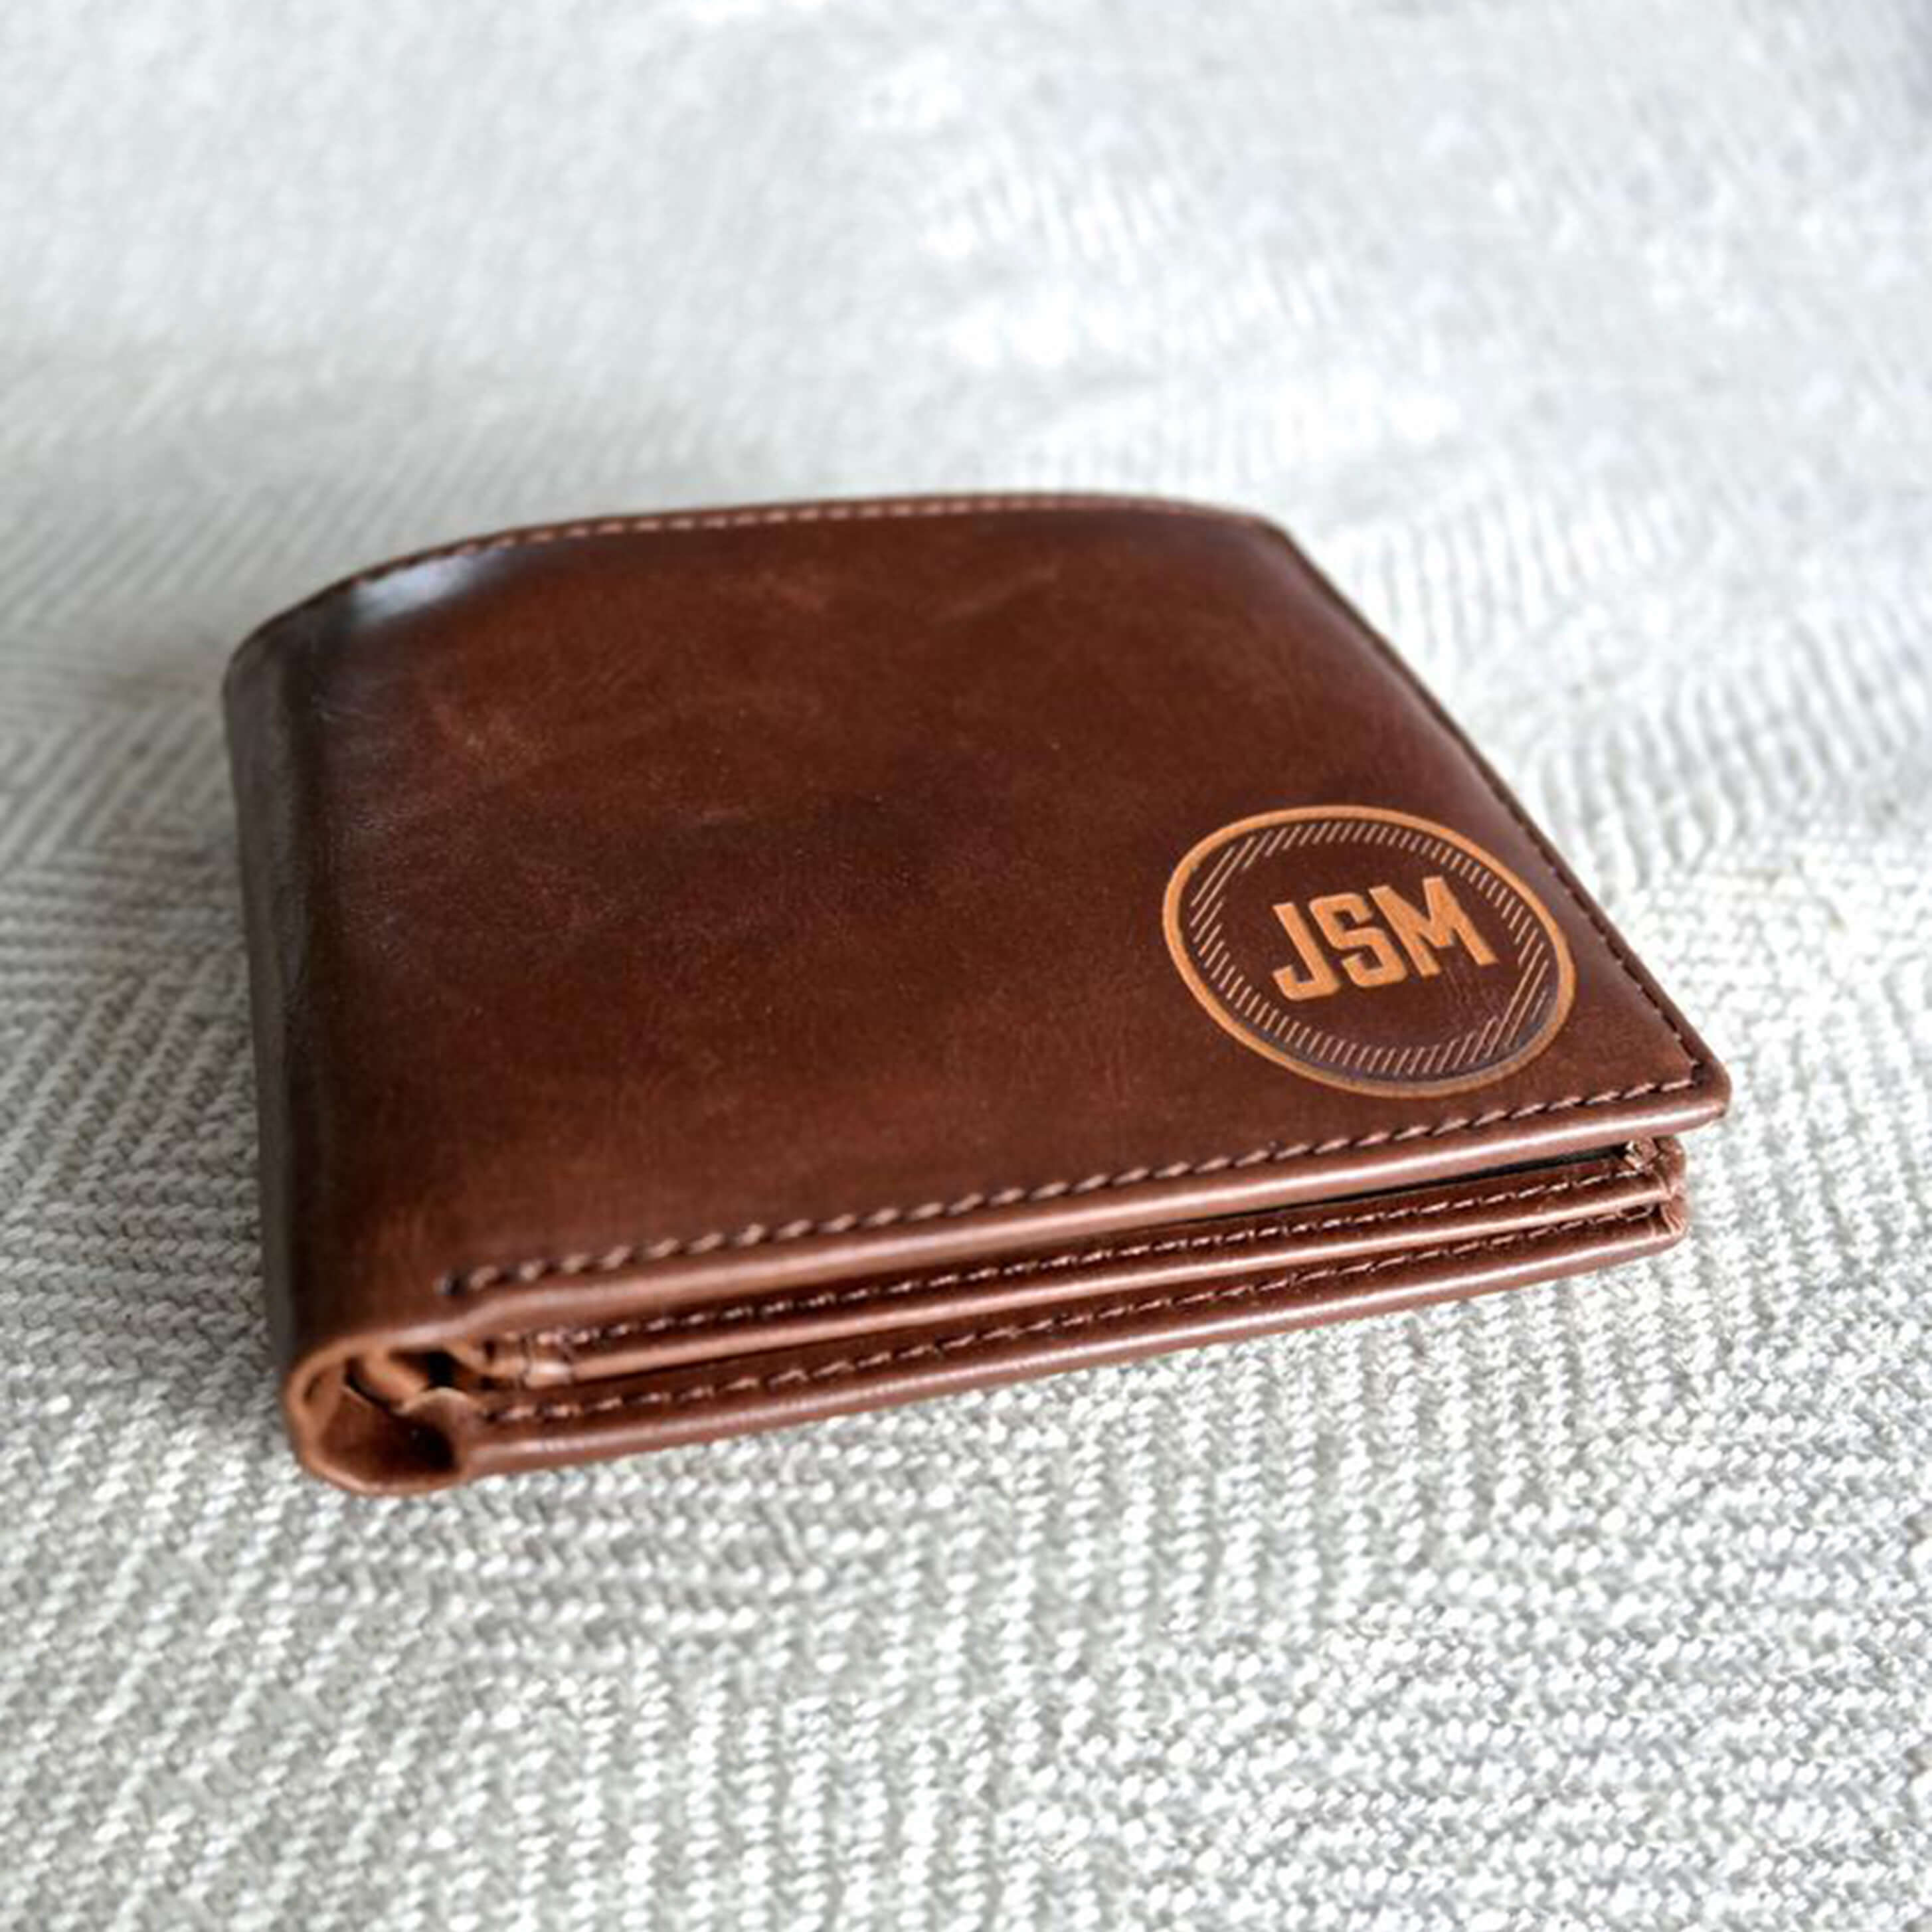 Men's Personalized Engraved Monogrammed Leather Wallet